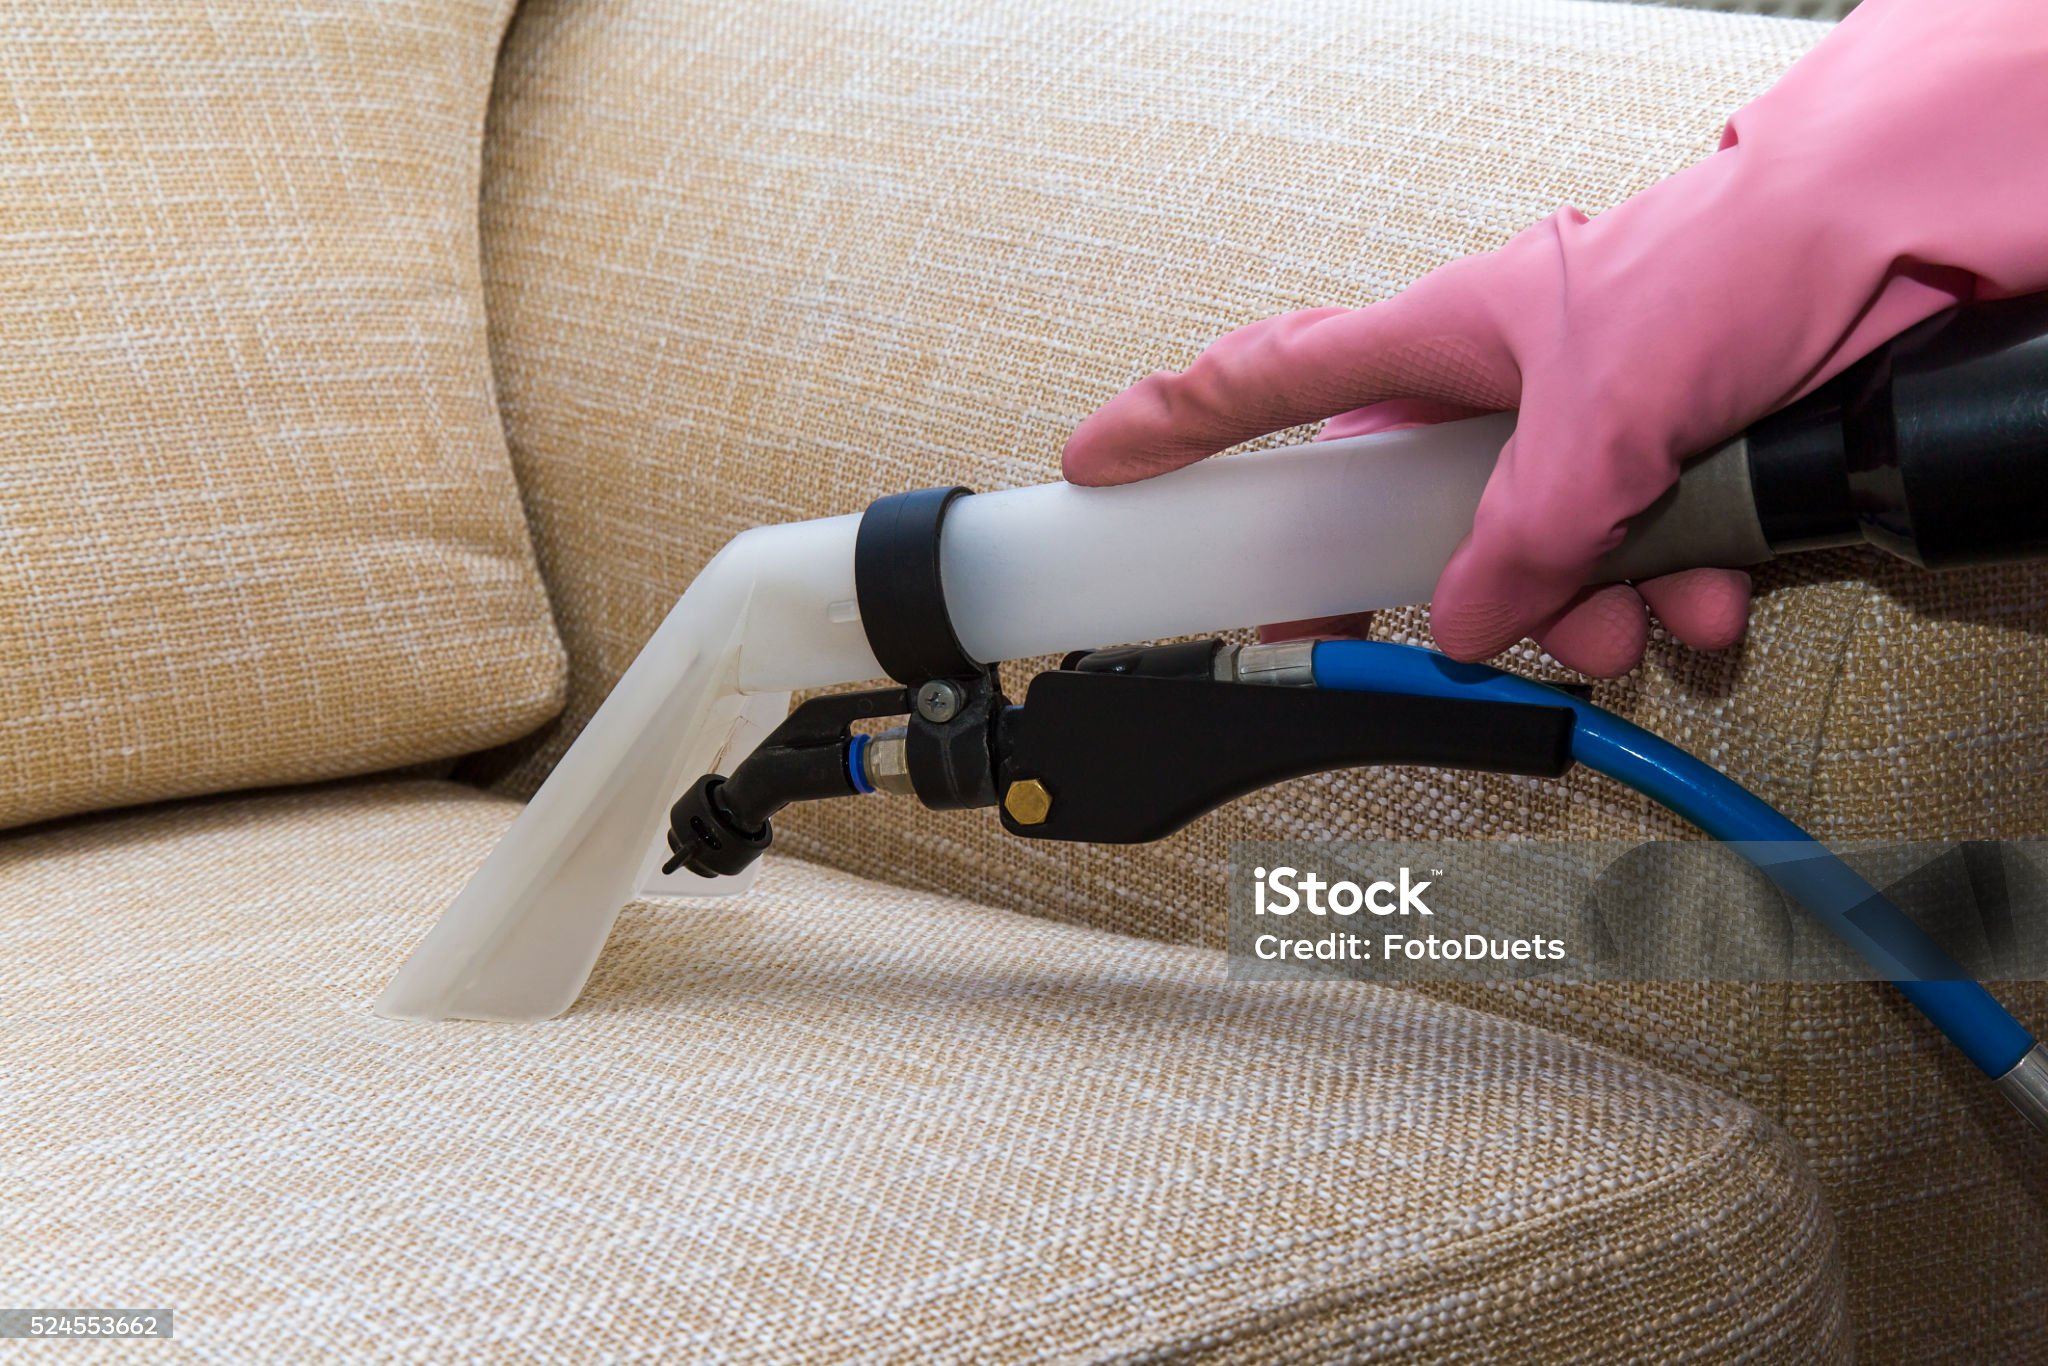 Sofa or armchair chemical cleaning with professionally extraction method. Dirty upholstered furniture. Early spring cleaning or regular clean up.